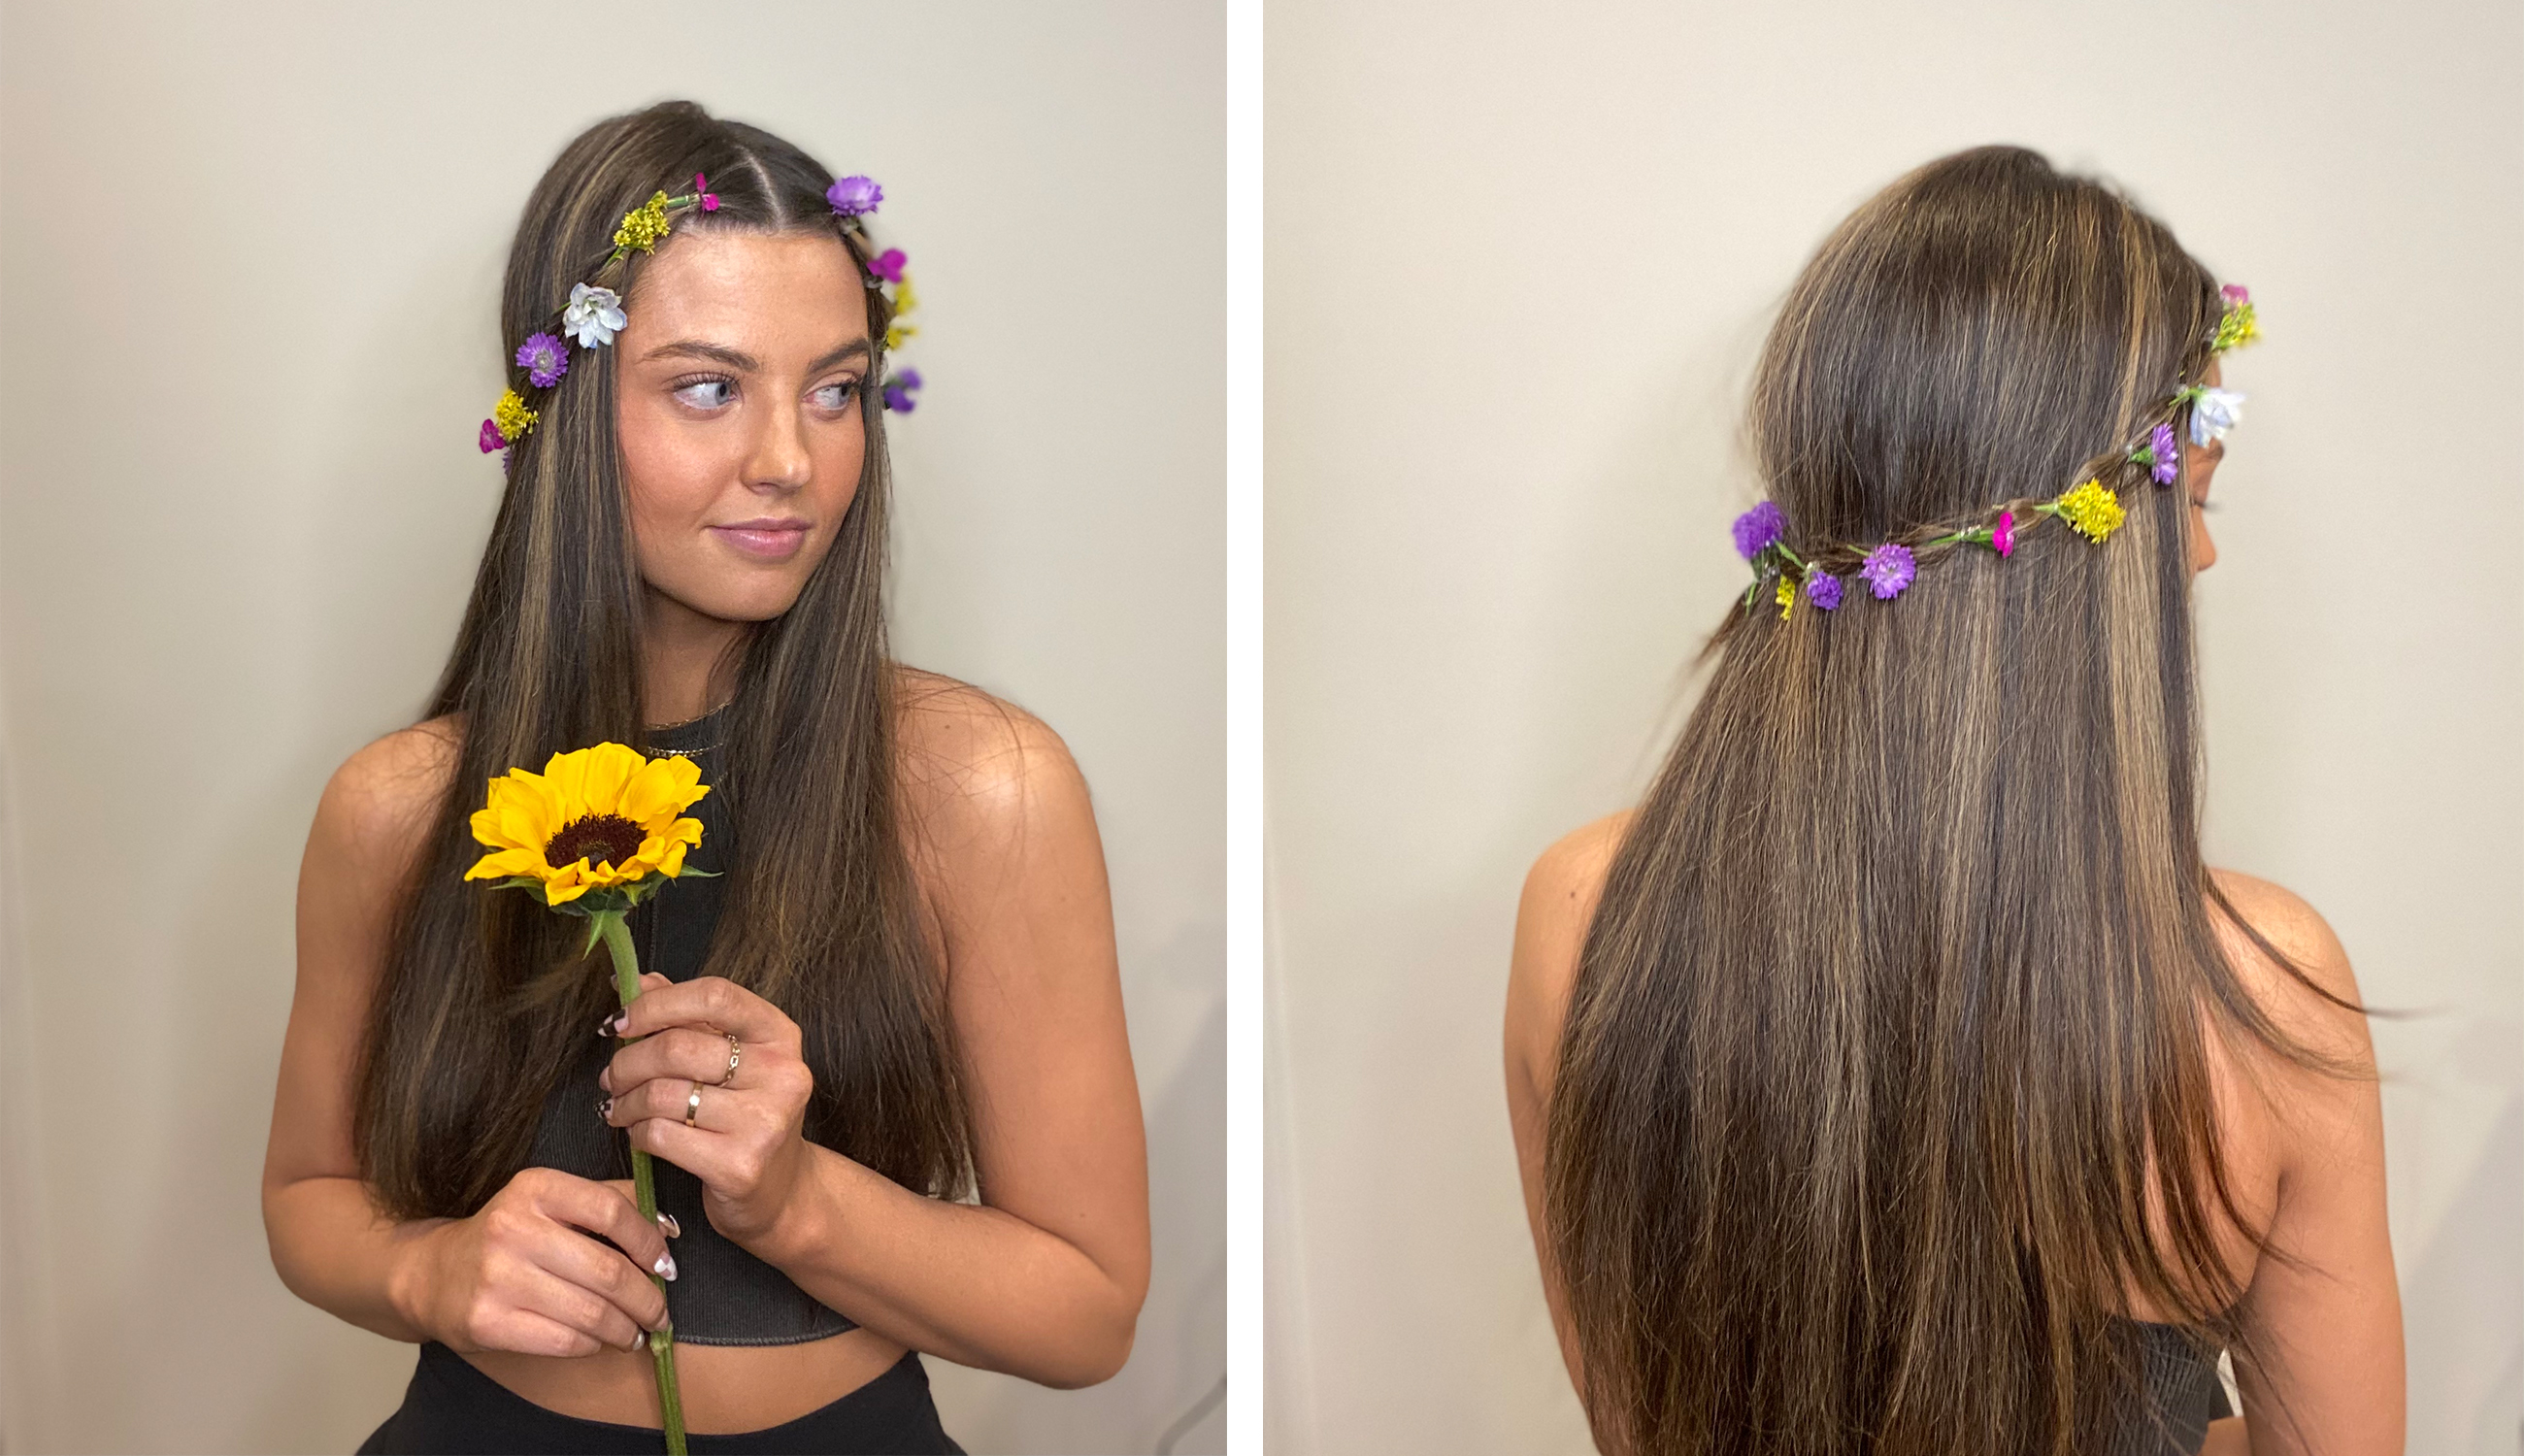 Model displaying festival hairstyle with fresh flowers